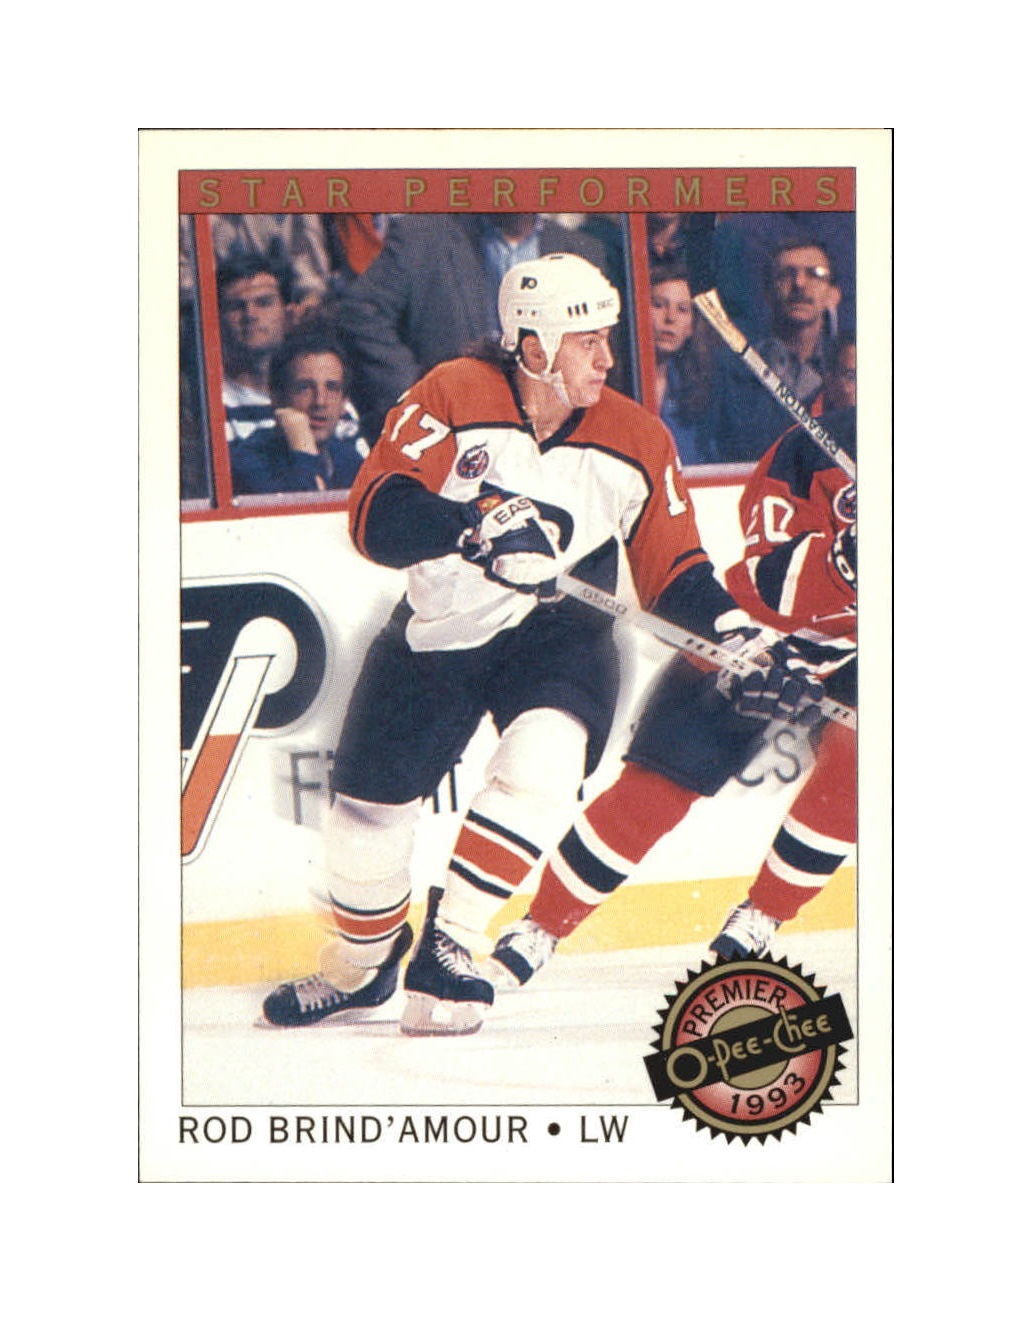 1992-93 OPC Premier Star Performers #9 Rod Brind'Amour (10-X174-FLYERS)